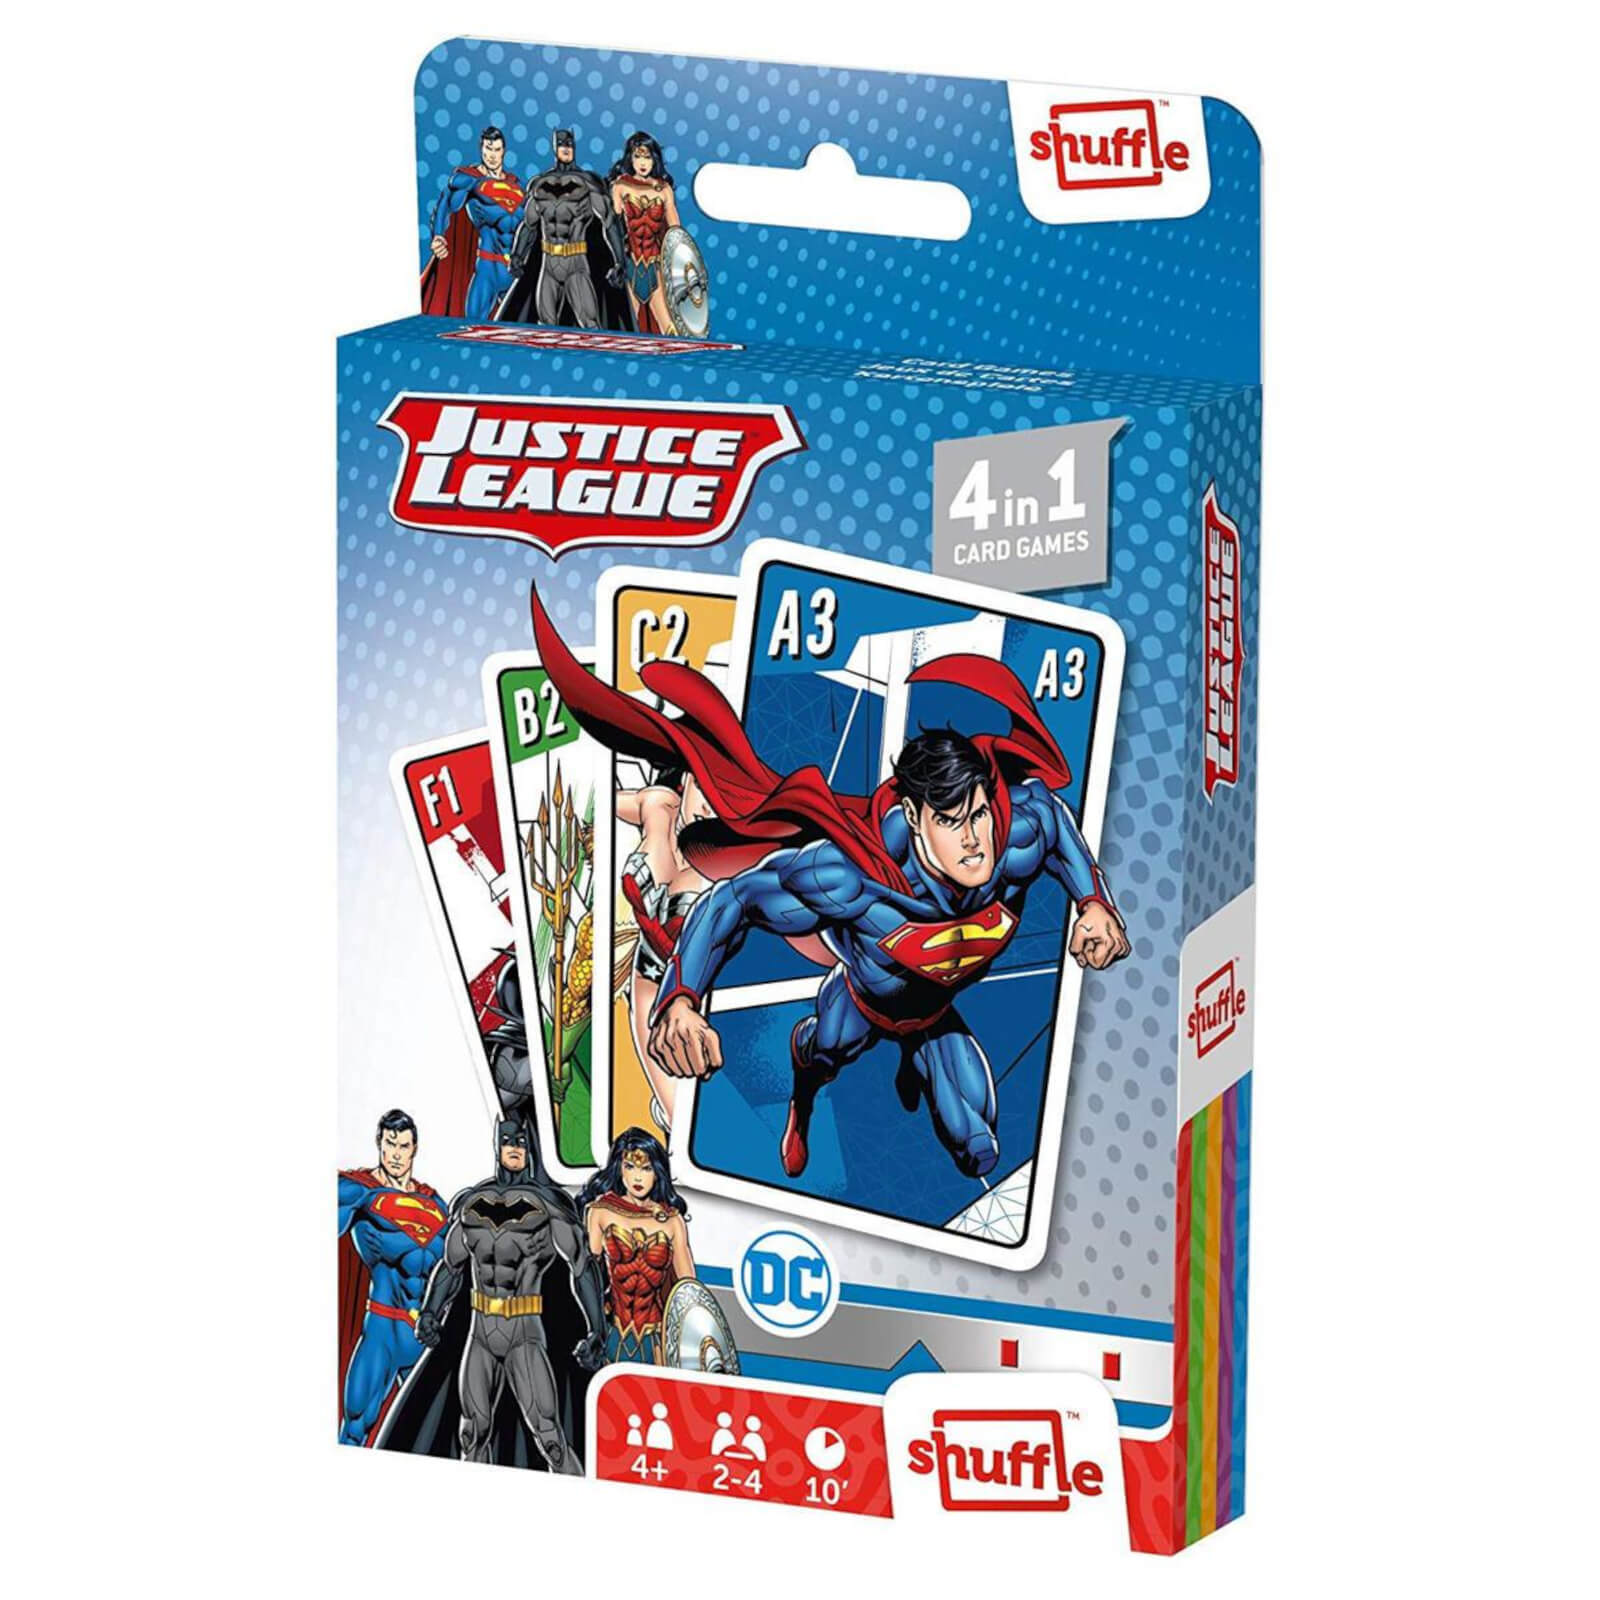 Shuffle Plus Card Game - Justice League